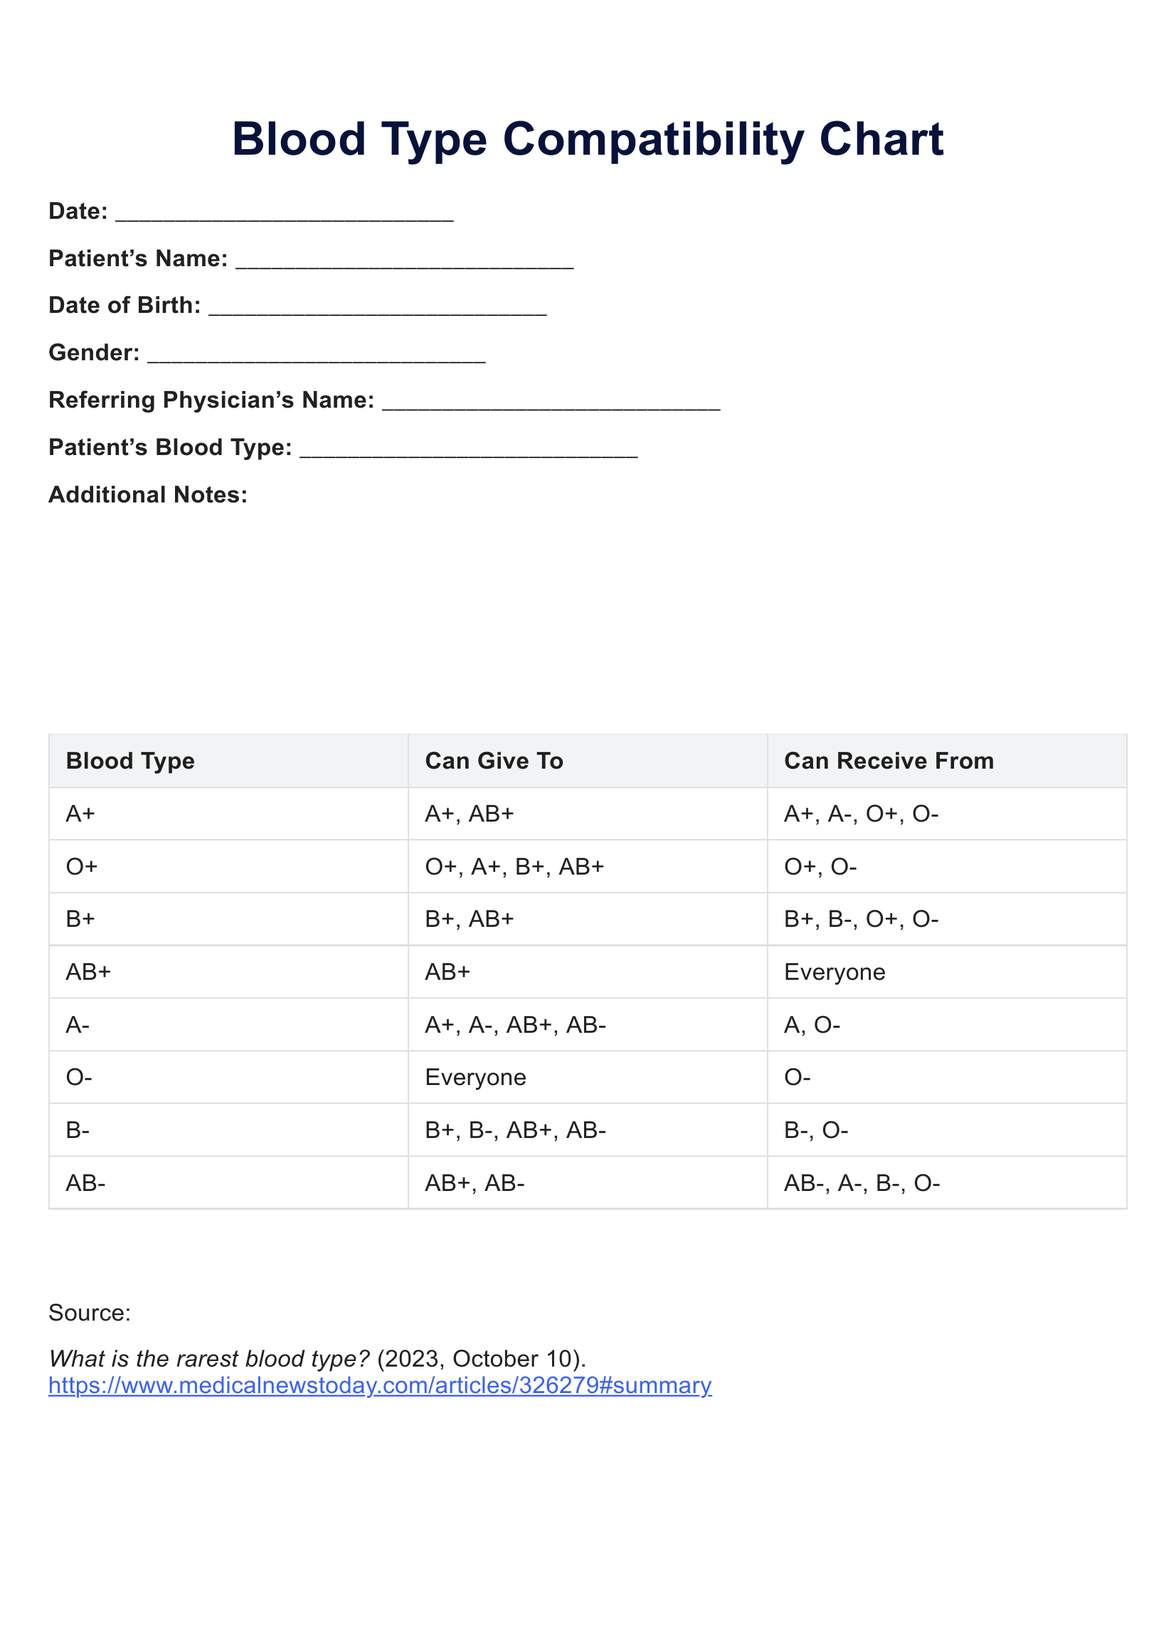 Blood Type Compatibility Chart PDF Example